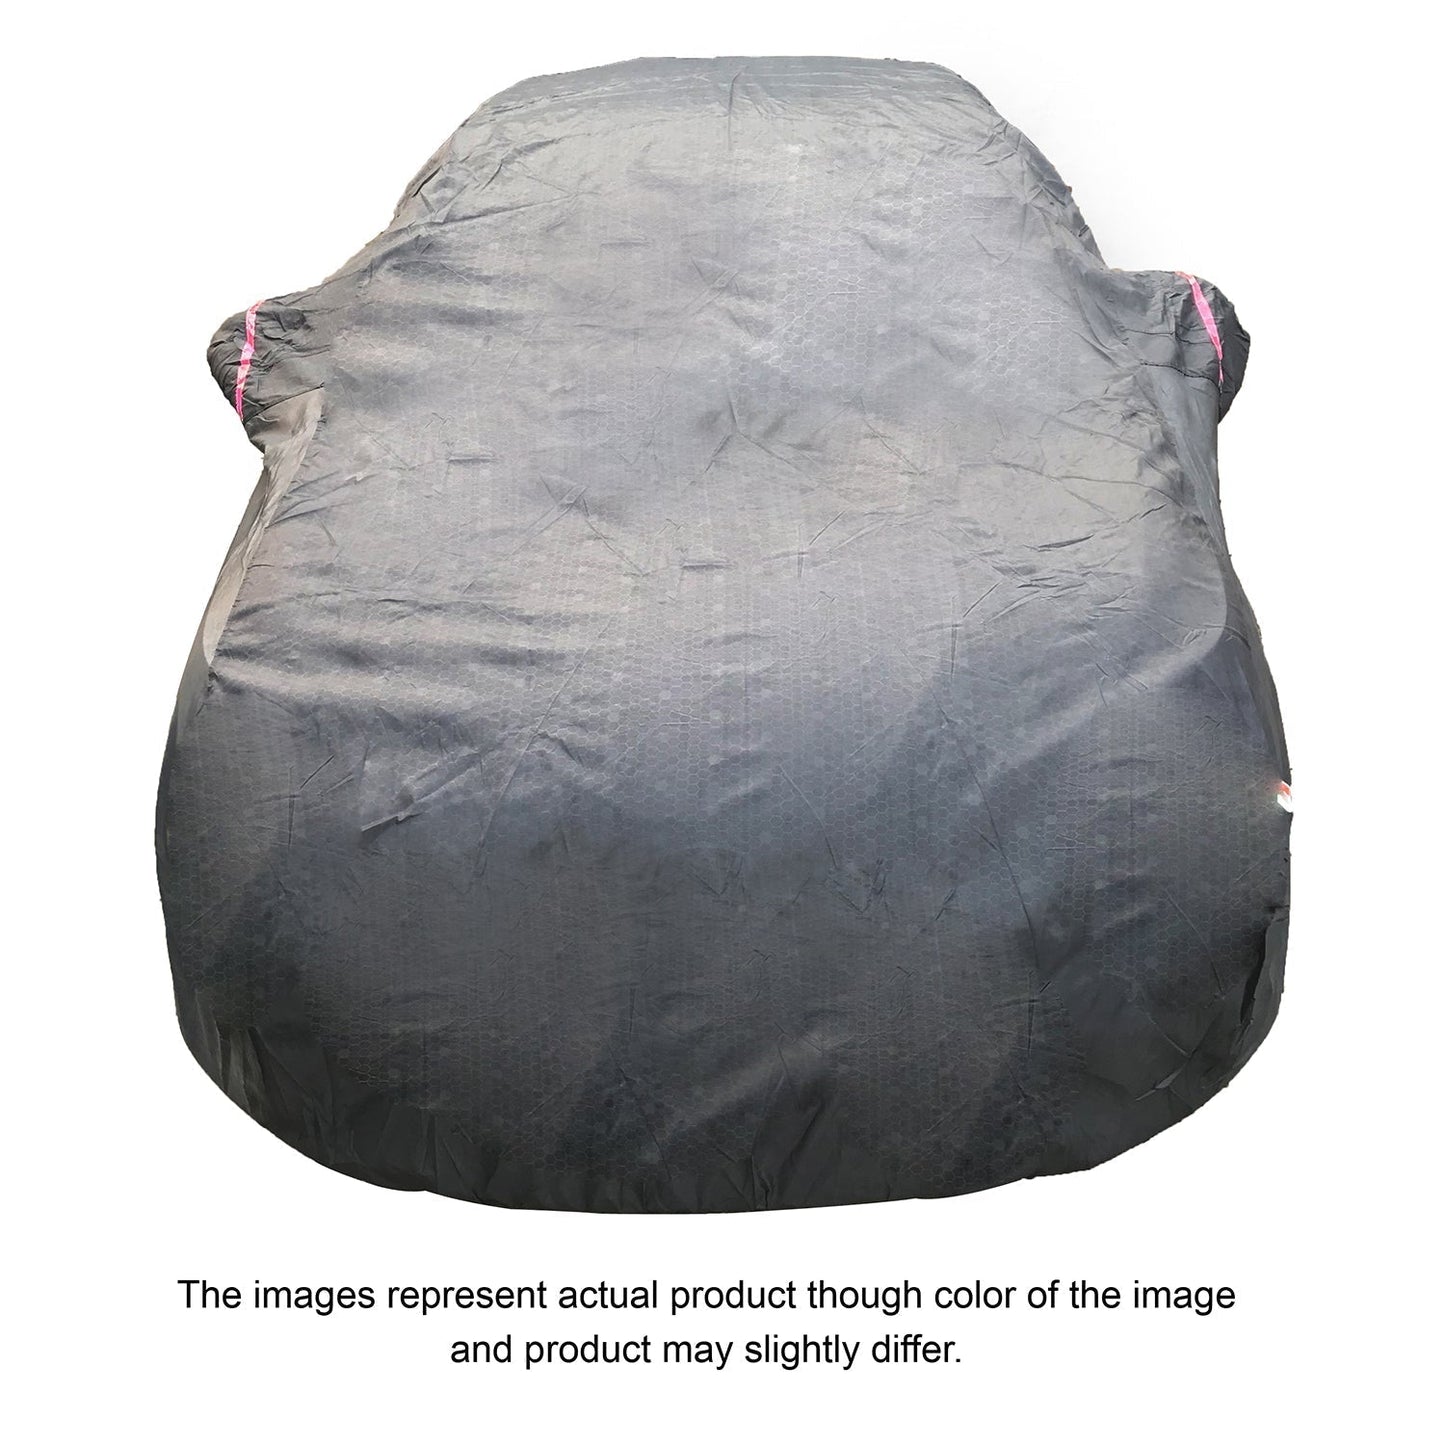 Oshotto 100% Dust Proof, Water Resistant Grey Car Body Cover with Mirror Pockets For Tata Punch